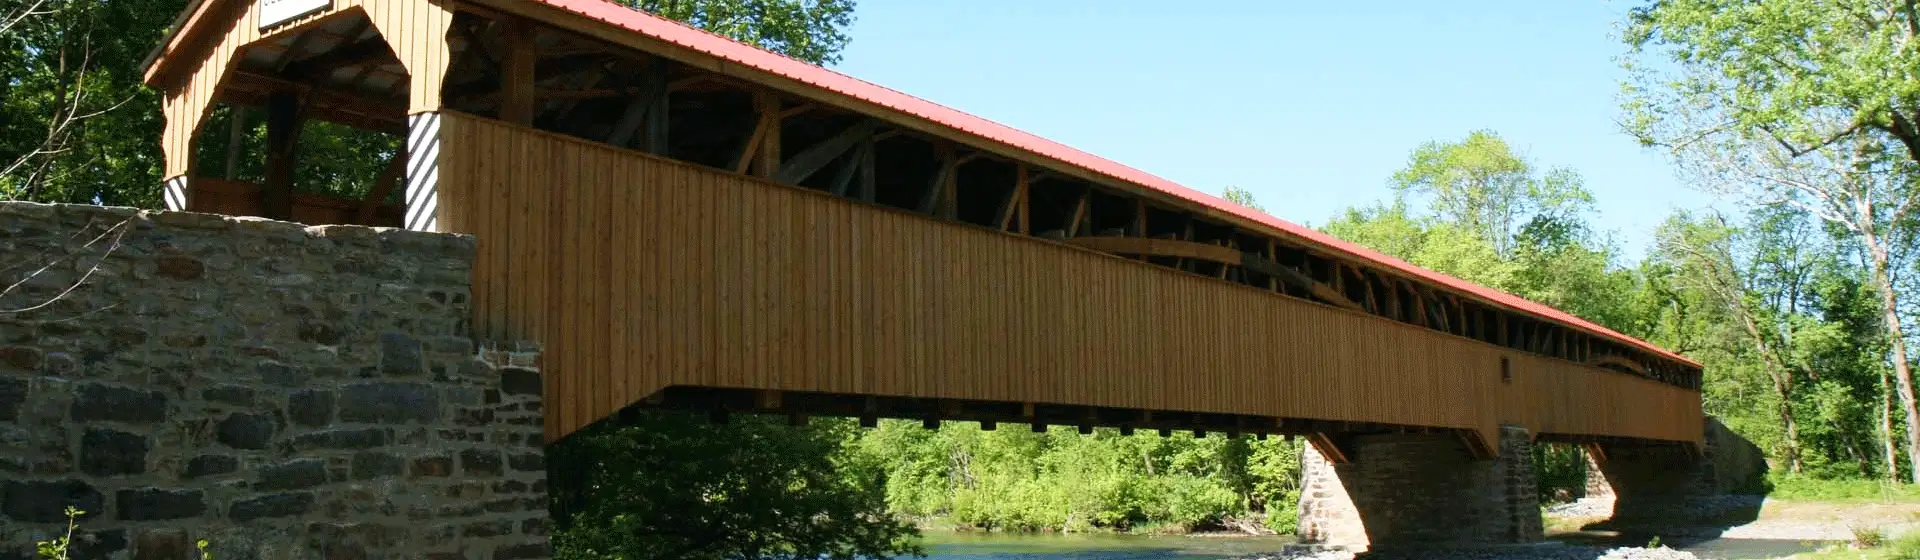 Discovering the Local Covered Bridges of Central PA